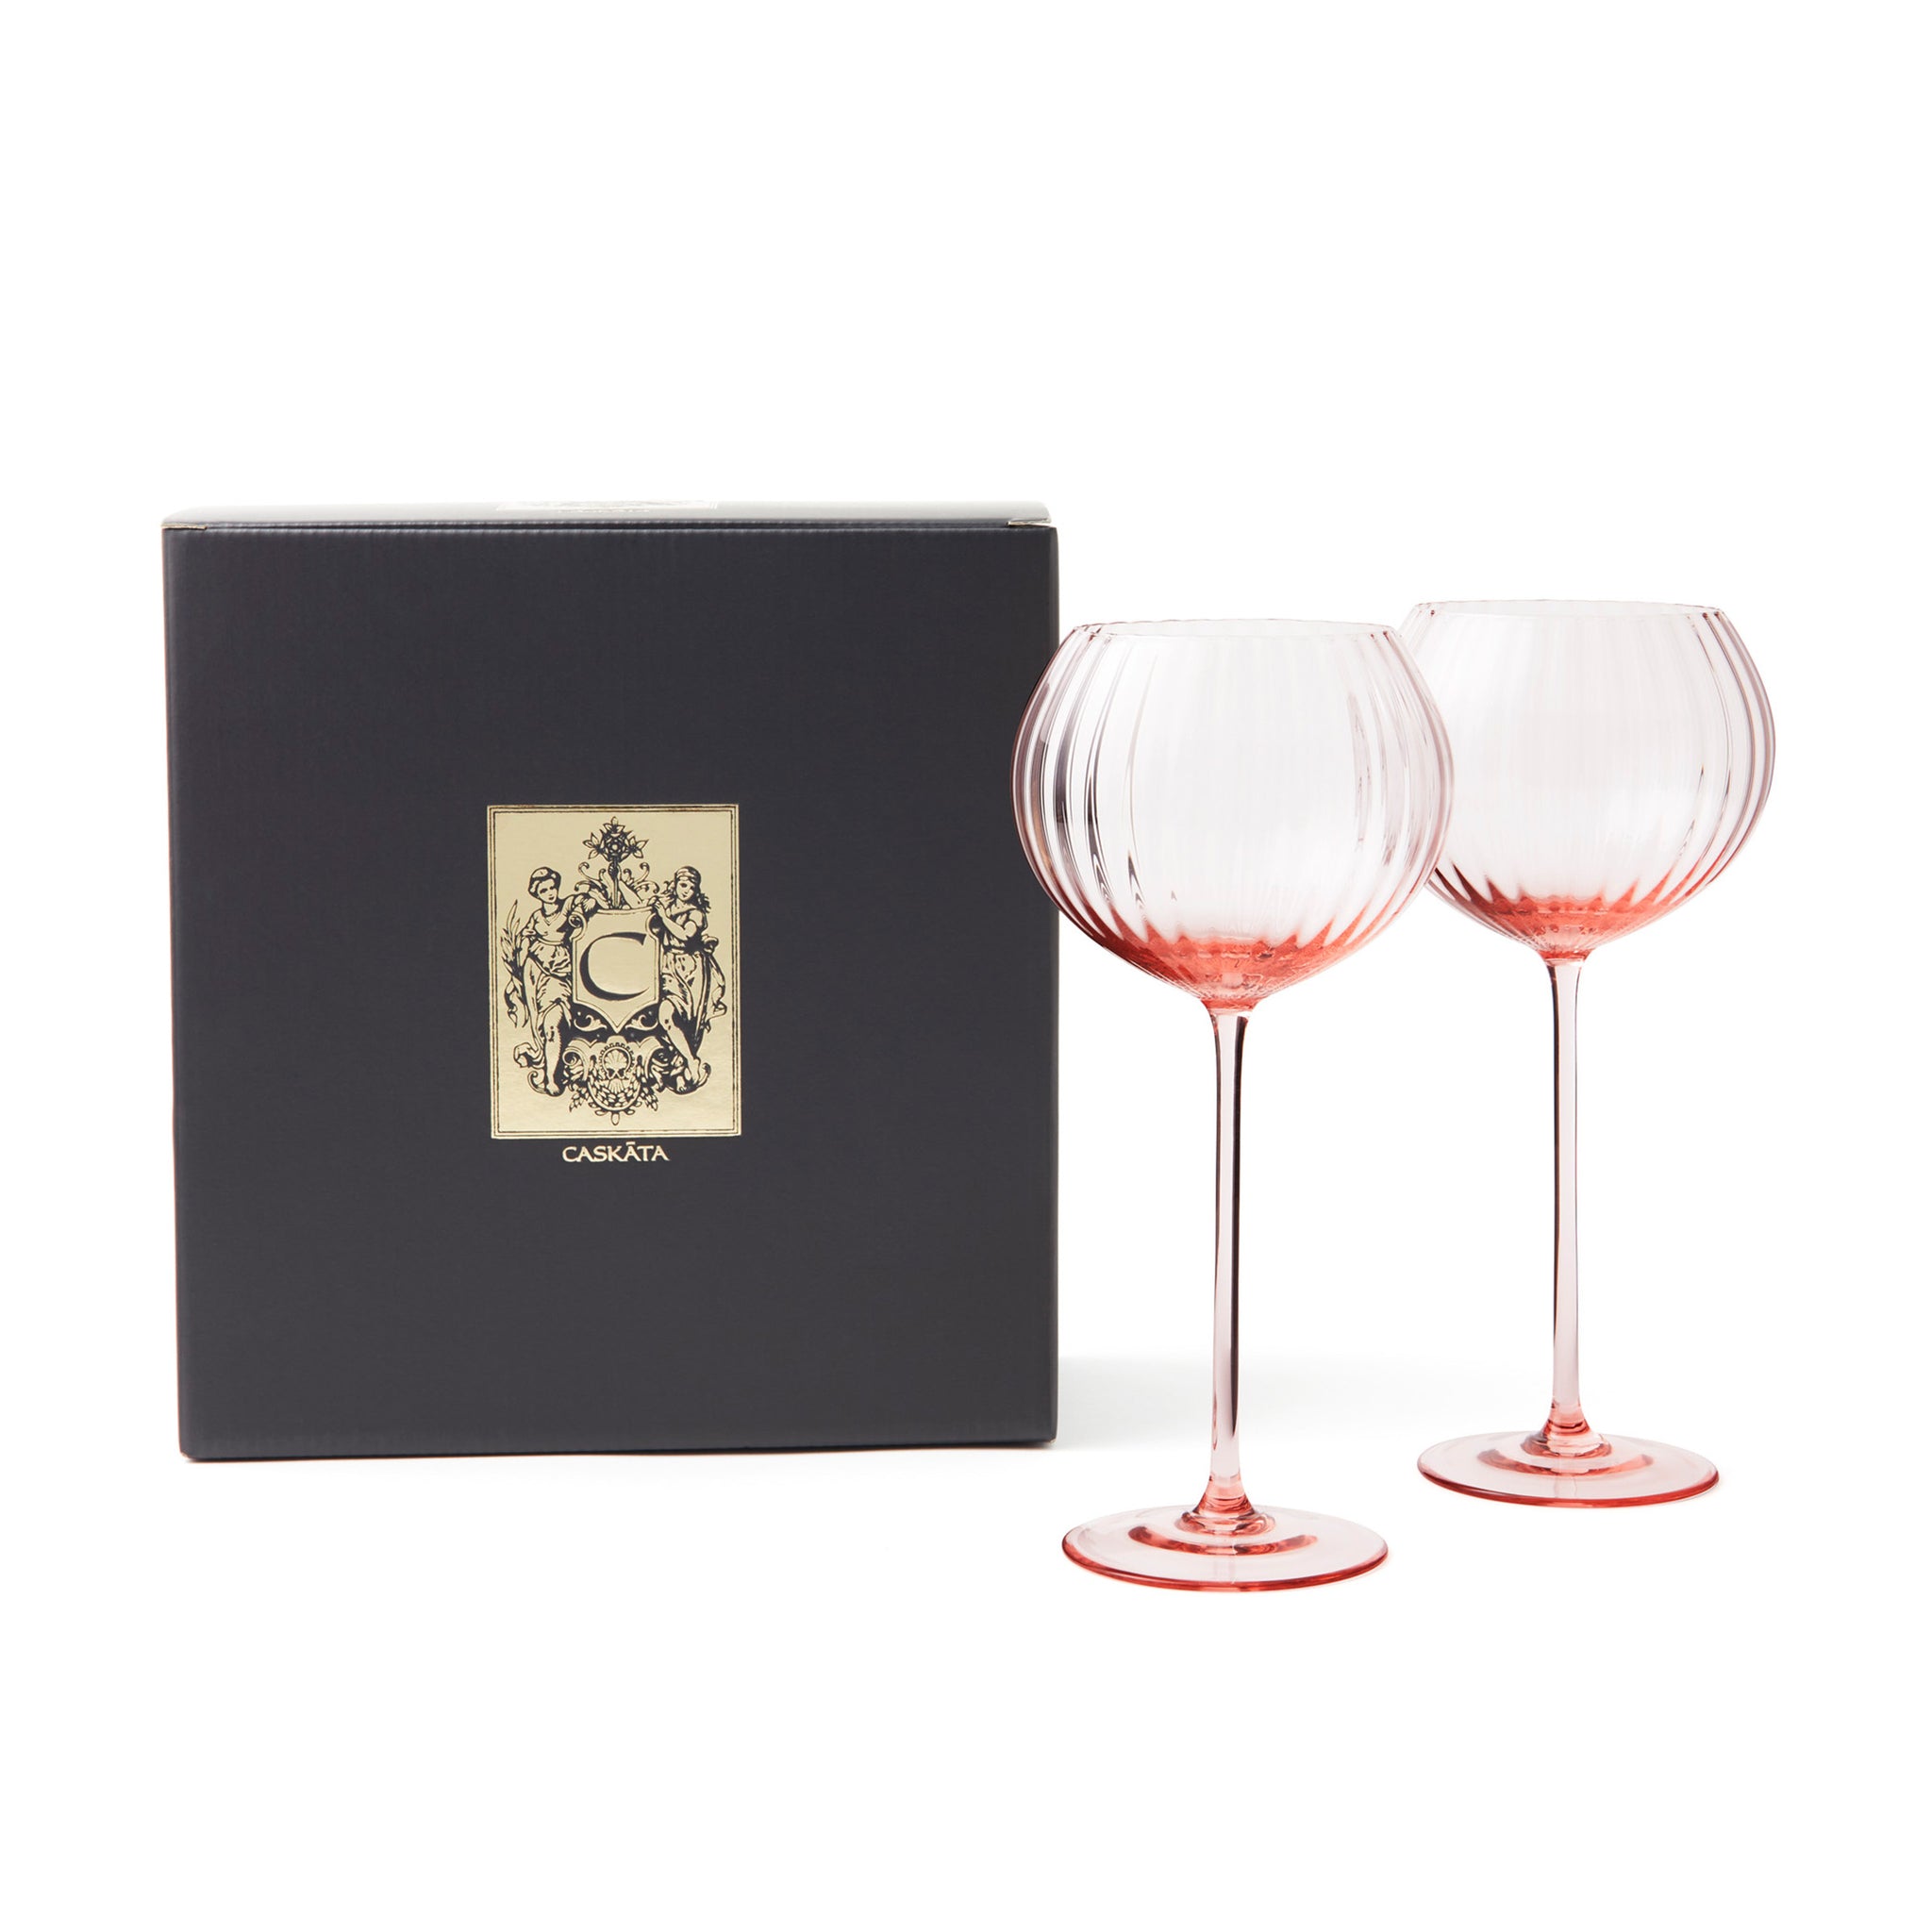 Rose Tinted Crystal Red Wine Glasses with Gold Rims - 20 oz - Set of 2